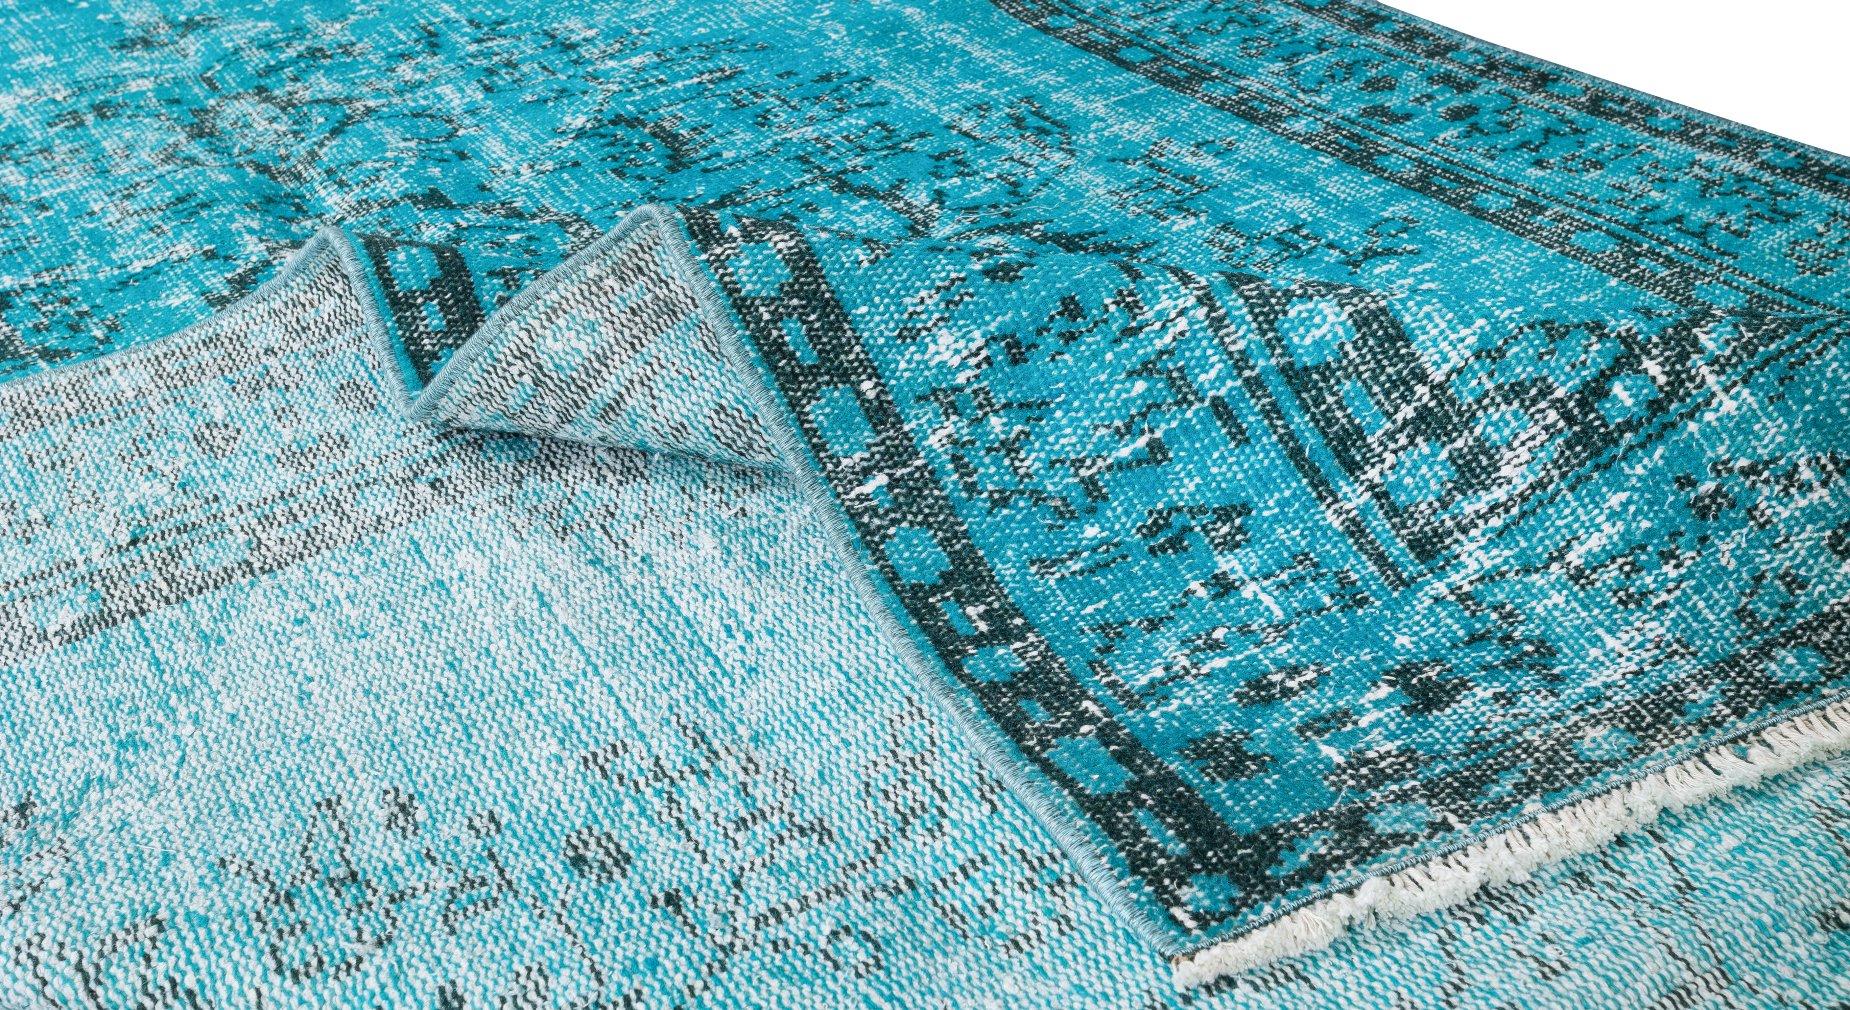 Hand-Woven 5.2x8.8 Ft Modern Handmade Rug. Turkish Vintage Carpet Over-Dyed in Teal Blue